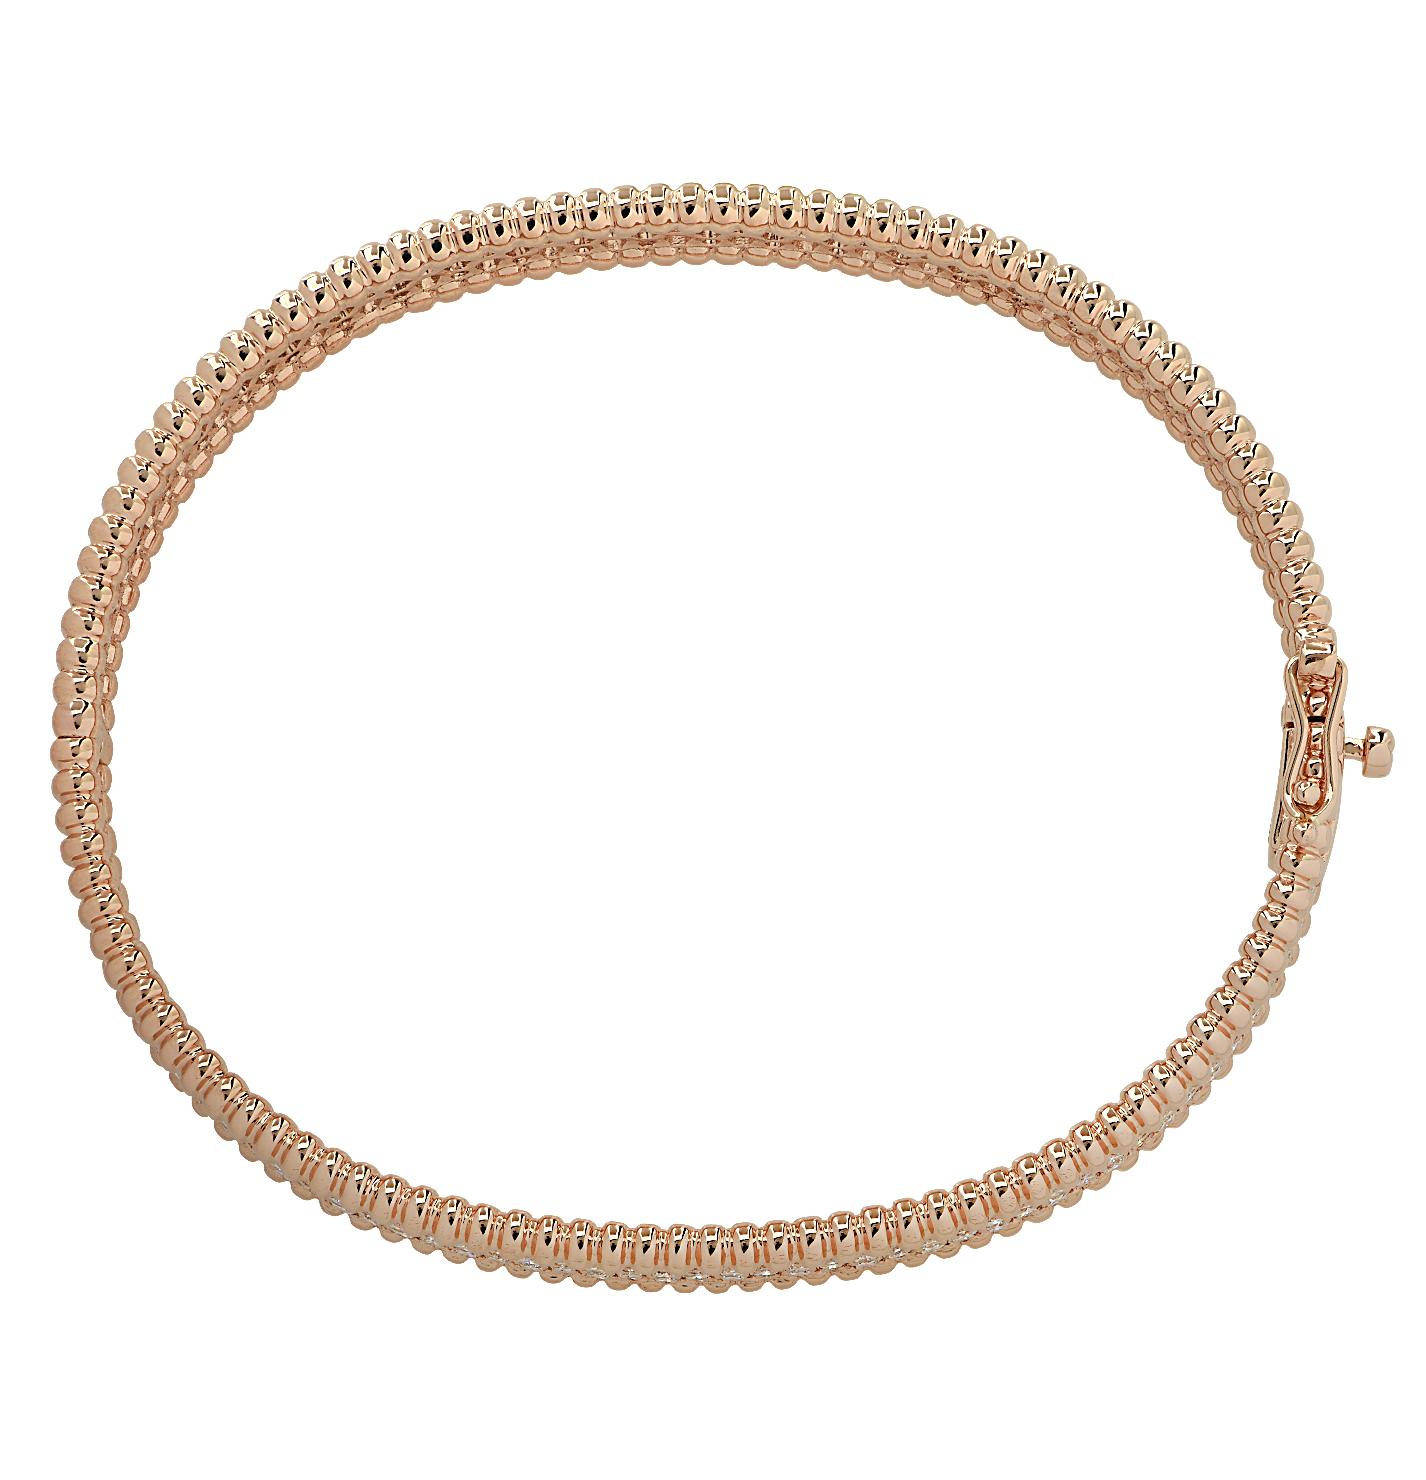 Stunning Vivid Diamonds Bangle Bracelet crafted in rose gold, featuring 262 round brilliant cut diamonds weighing 2.87 carats total, F-G color, VS-SI clarity. This elegant bangle is set with three rows of diamonds, laced with rose gold beads